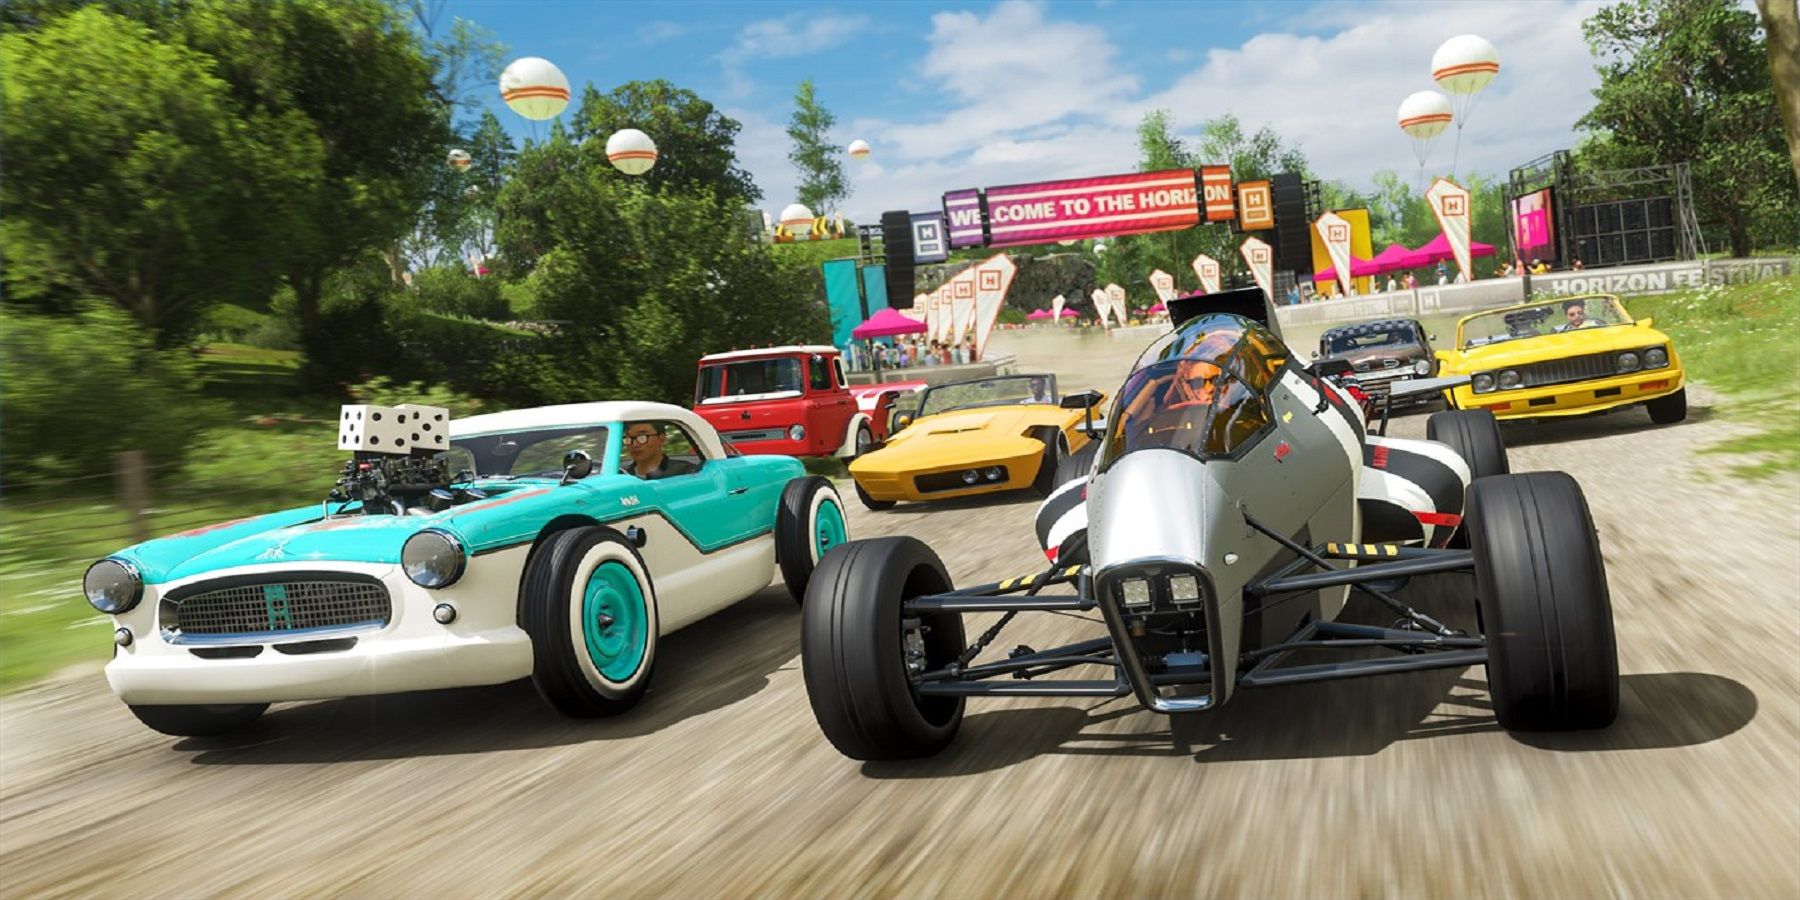 Forza Horizon 4 Not in Danger of Being Delisted Just
Yet